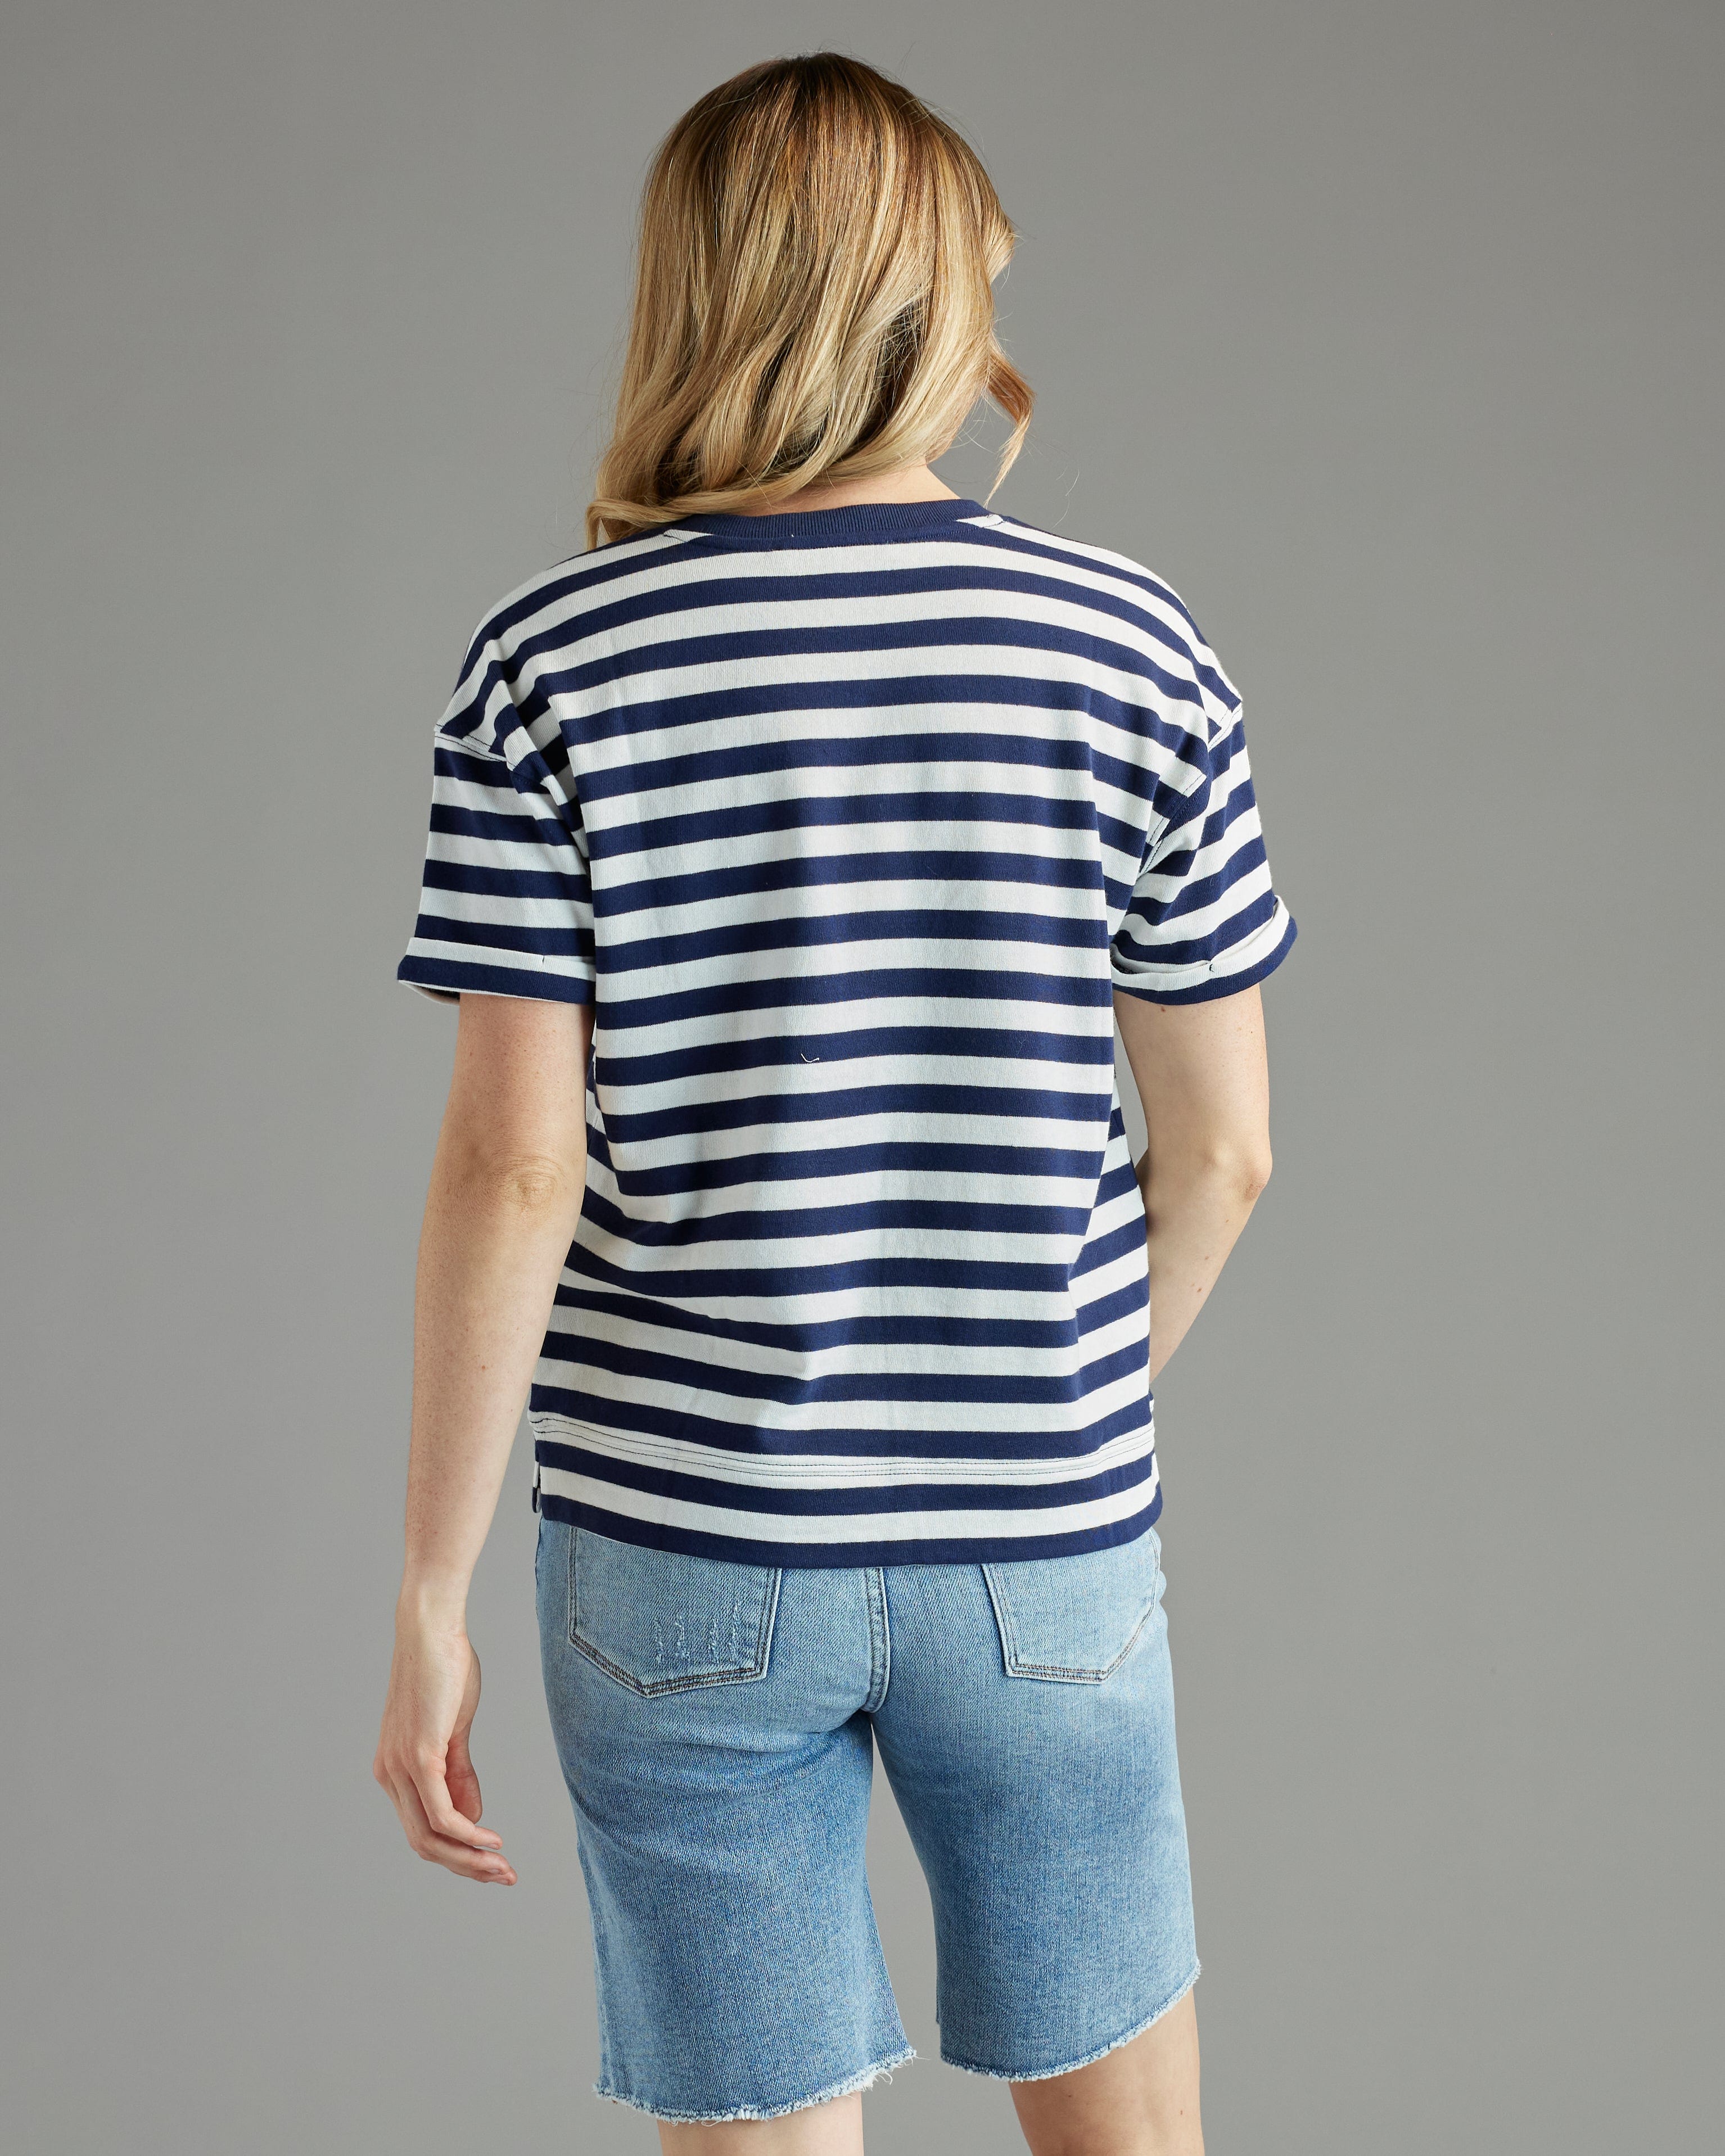 Woman in a blue and white striped short sleeve t-shirt